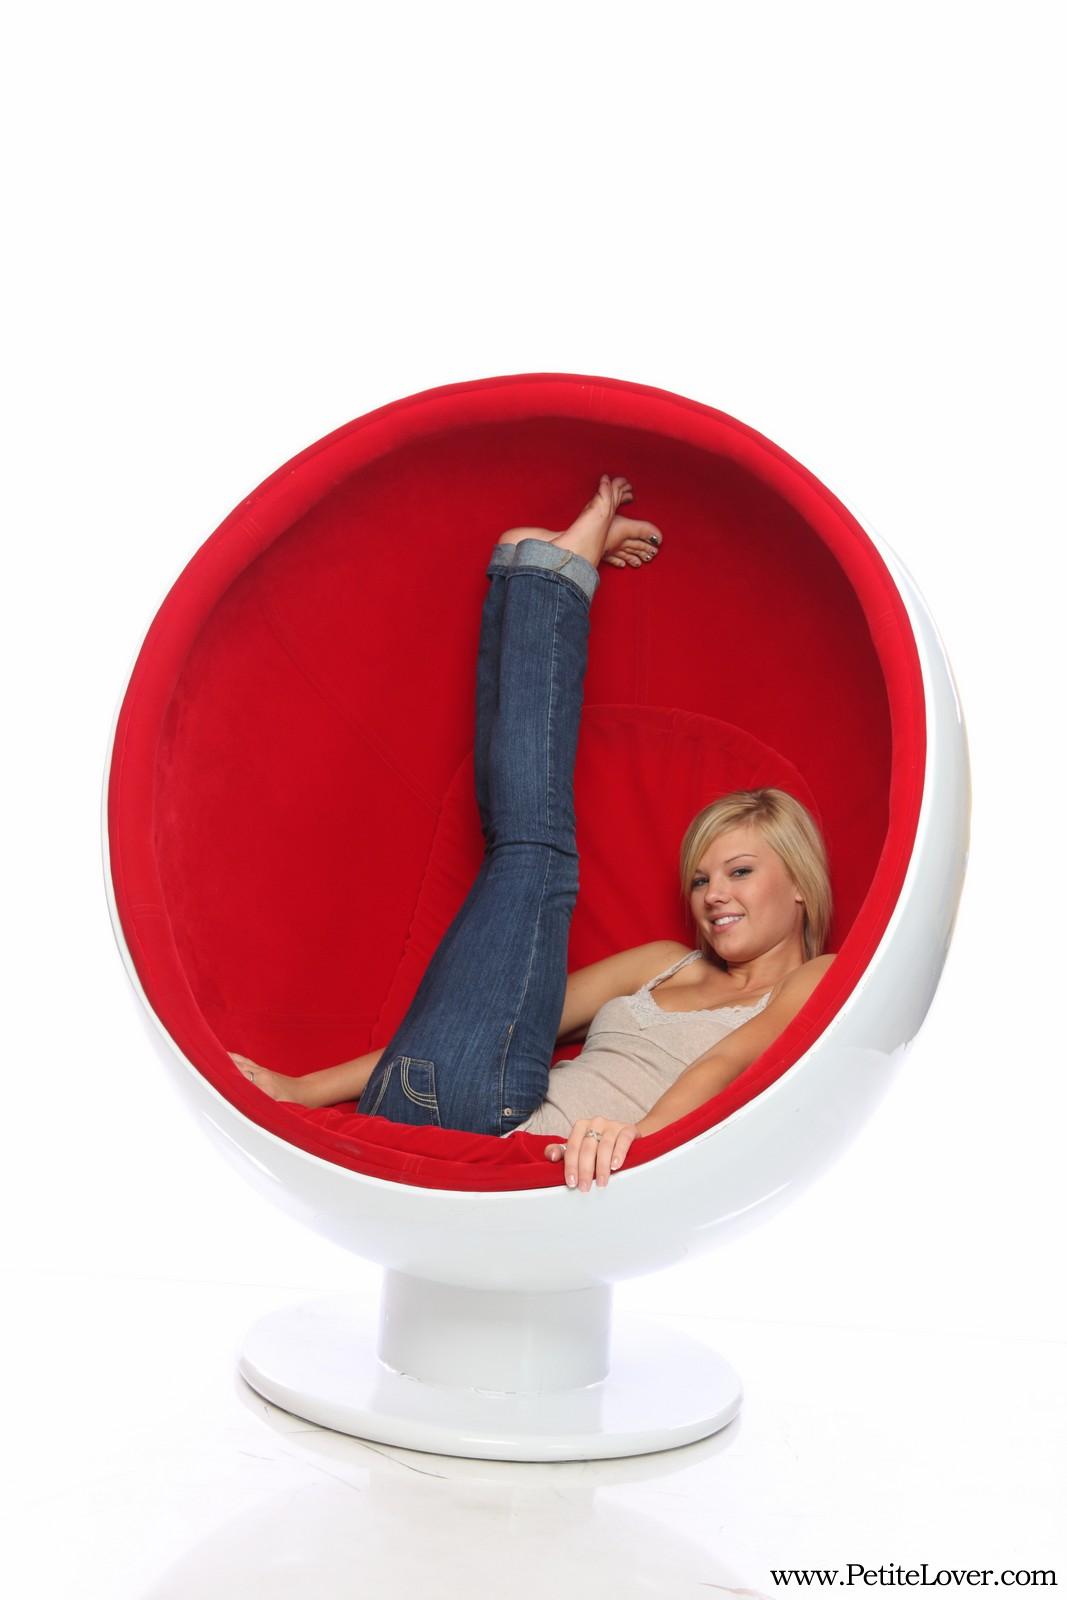 Blonde teen Tiffany poses for you in a red moon chair #60075553